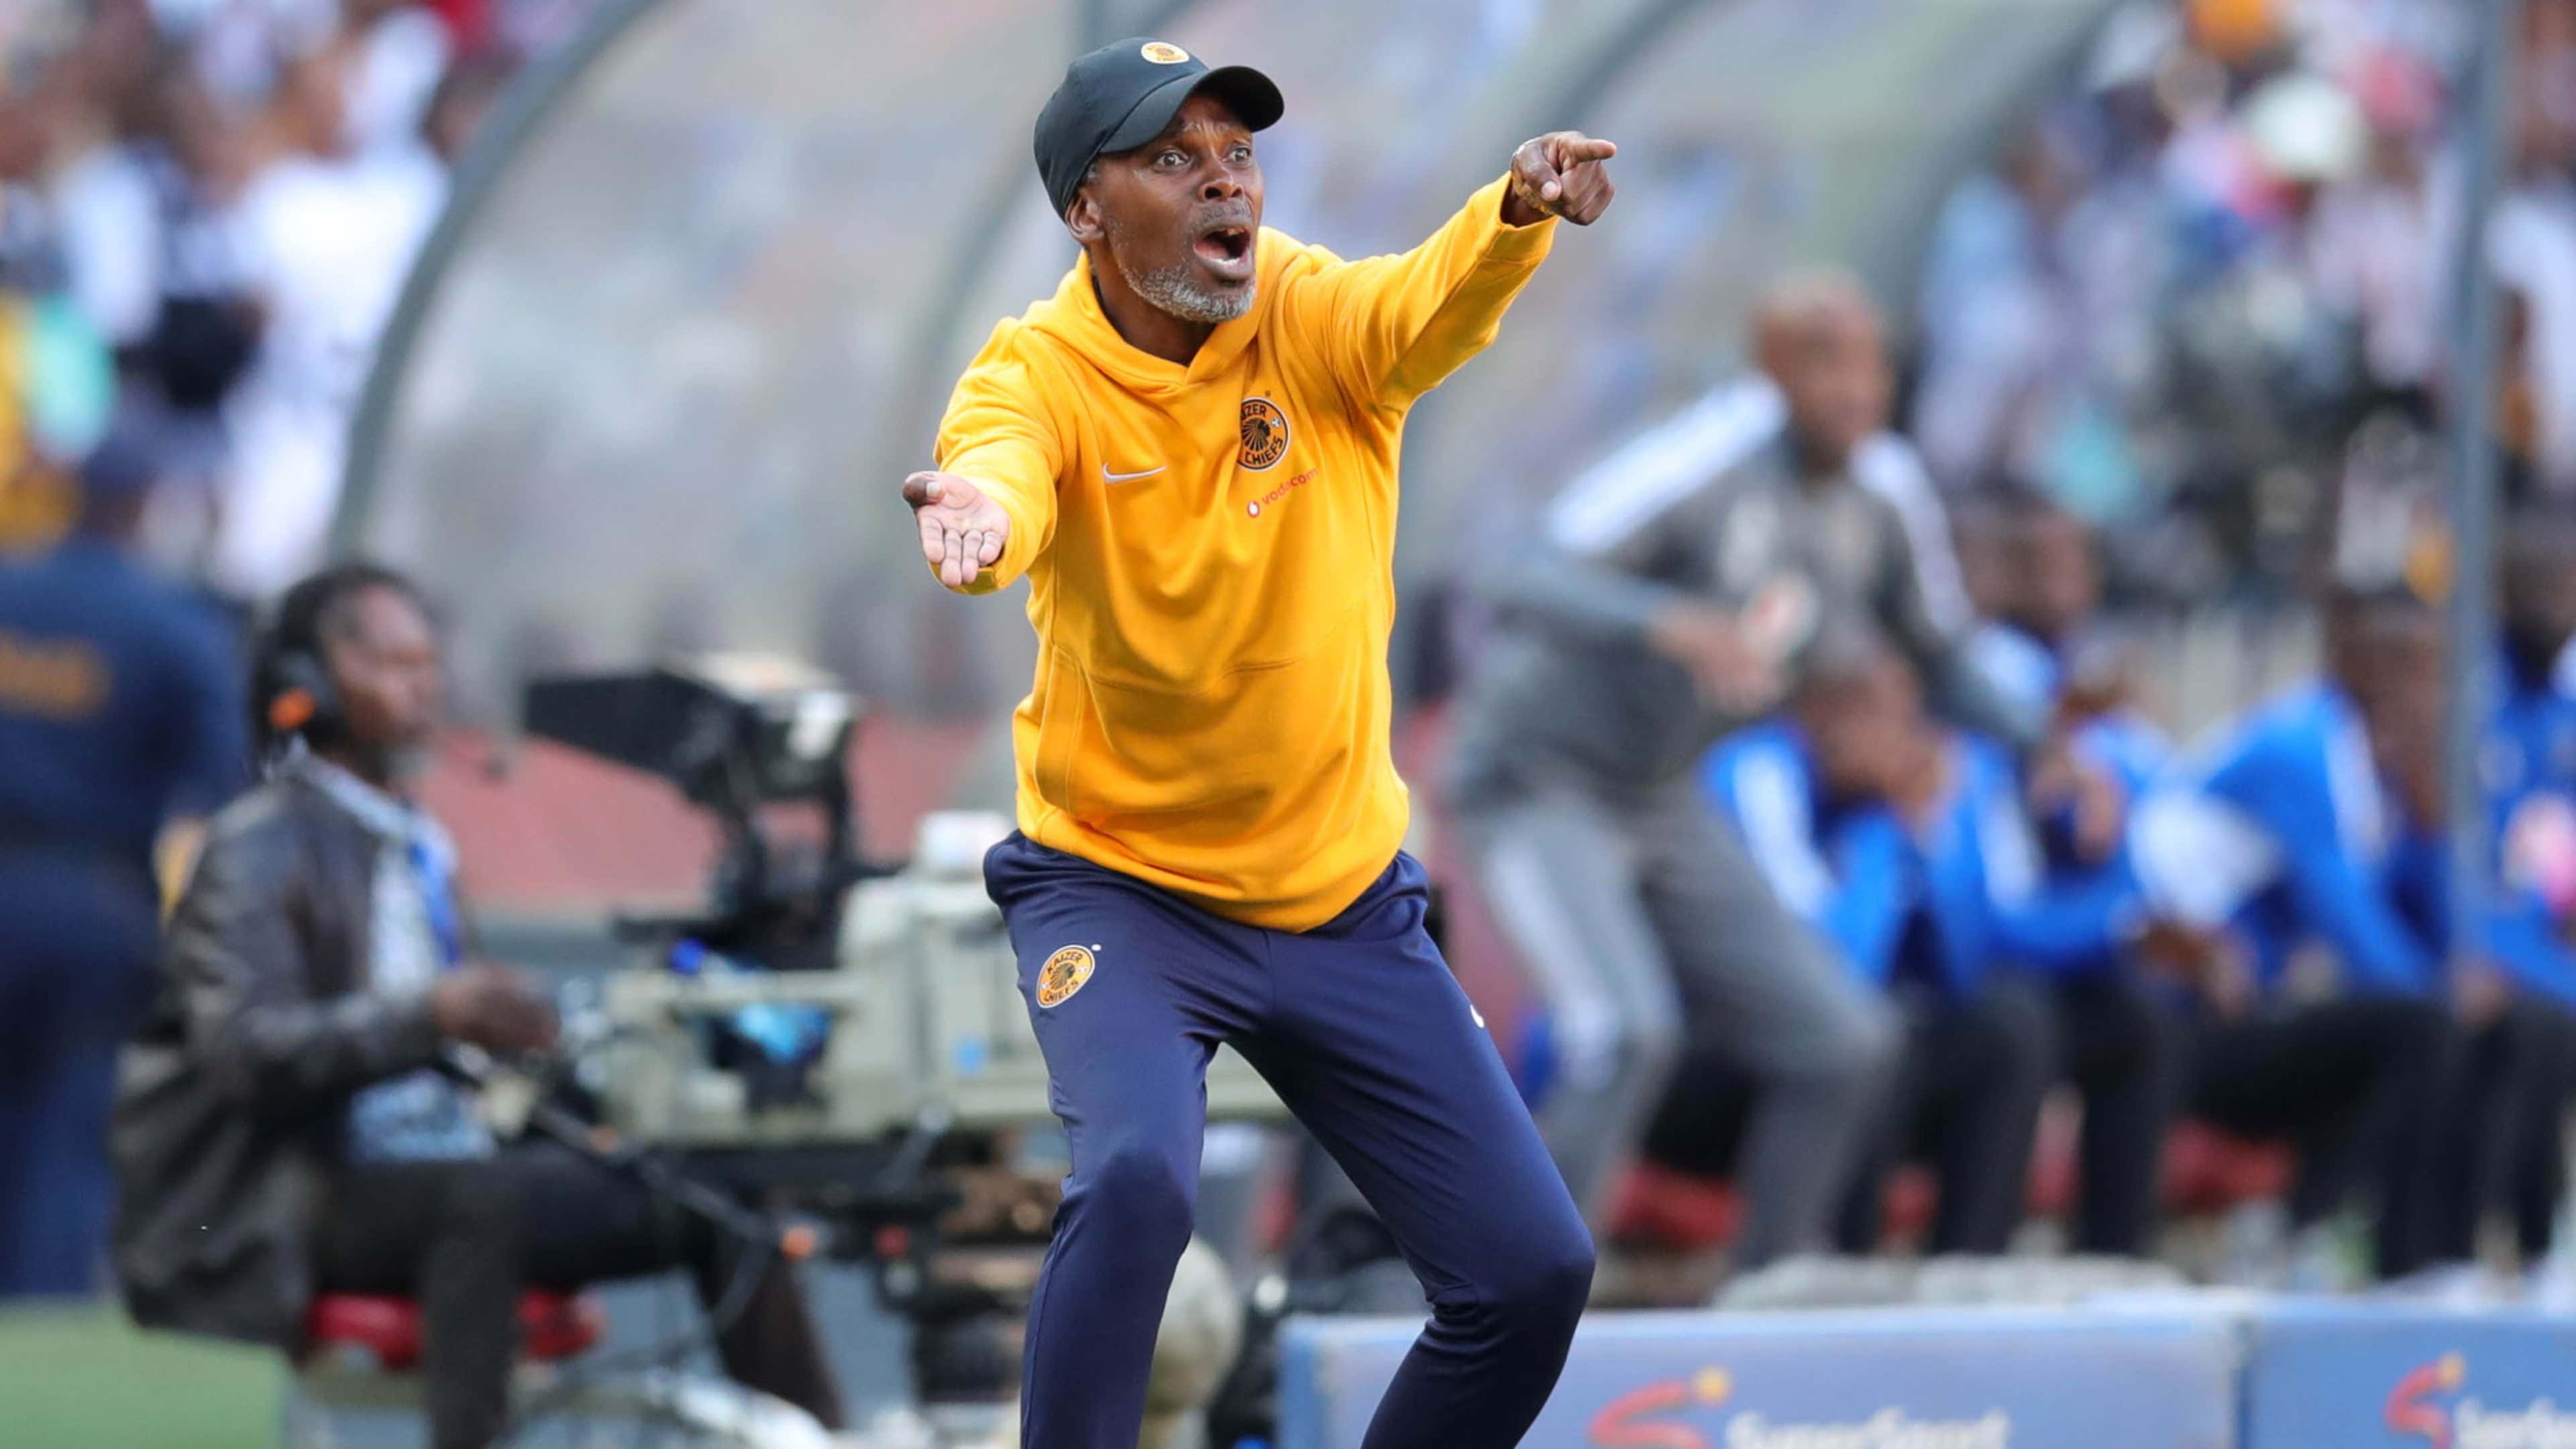 Kaizer Chiefs 1-0 Orlando Pirates, Derby Has Lost Its Spark